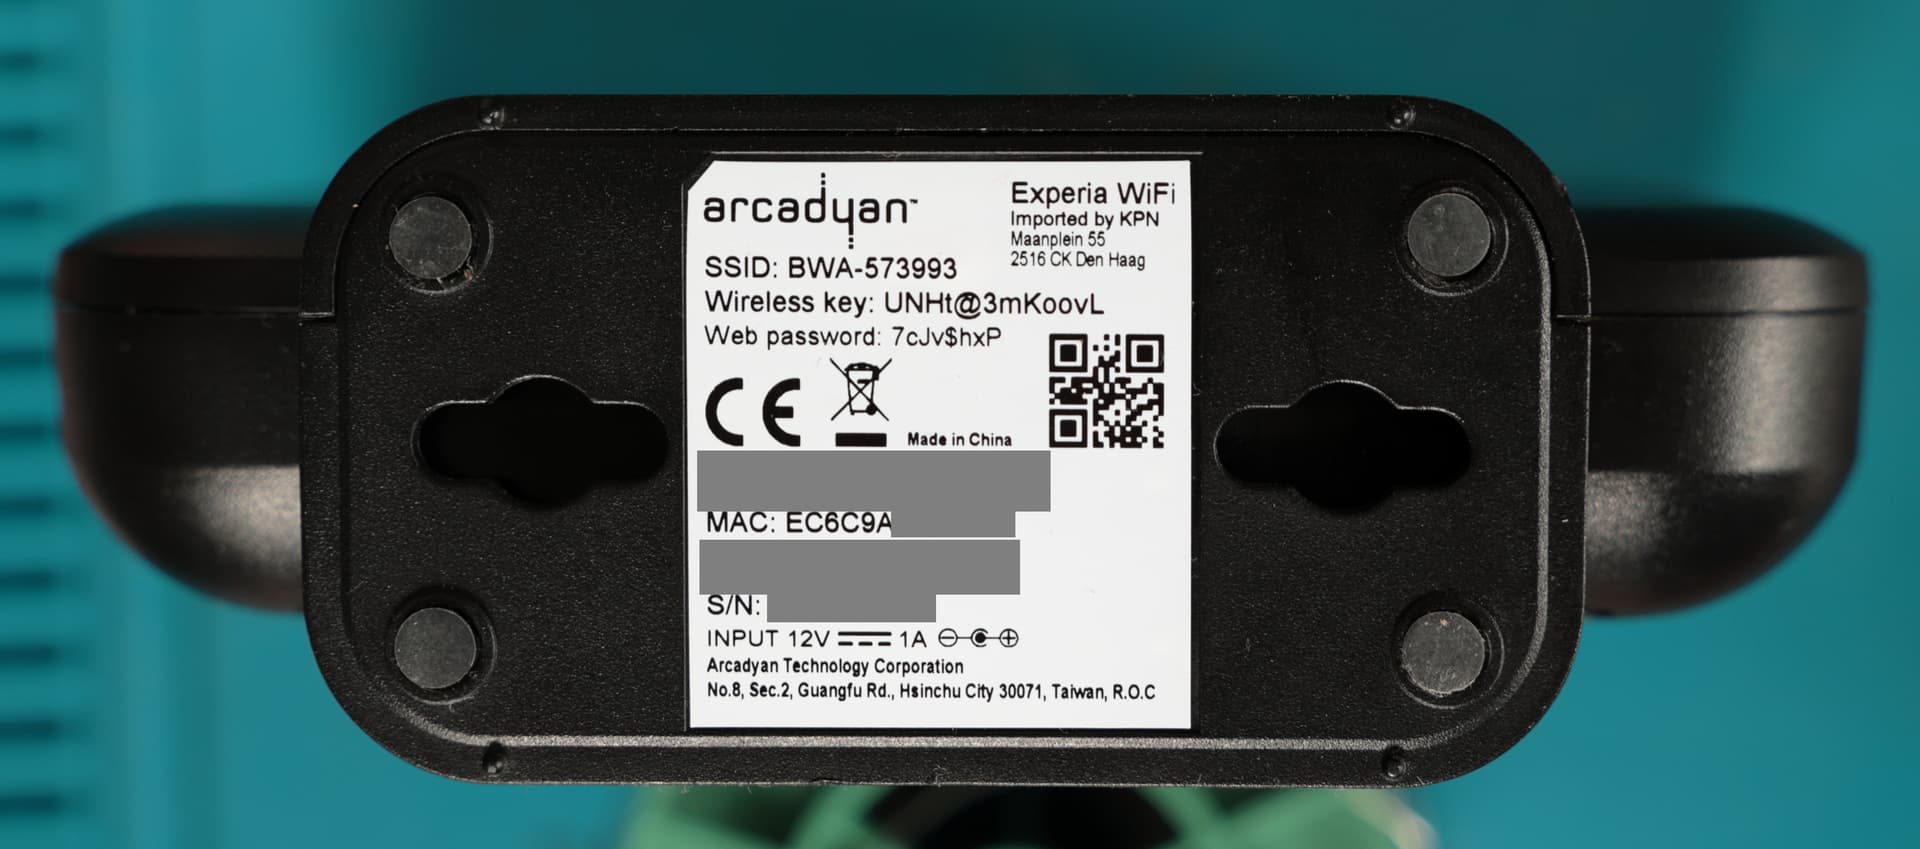 Adding Openwrt Support For Arcadyan We420223-99 (Kpn Experia Wifi) - For  Developers - Openwrt Forum